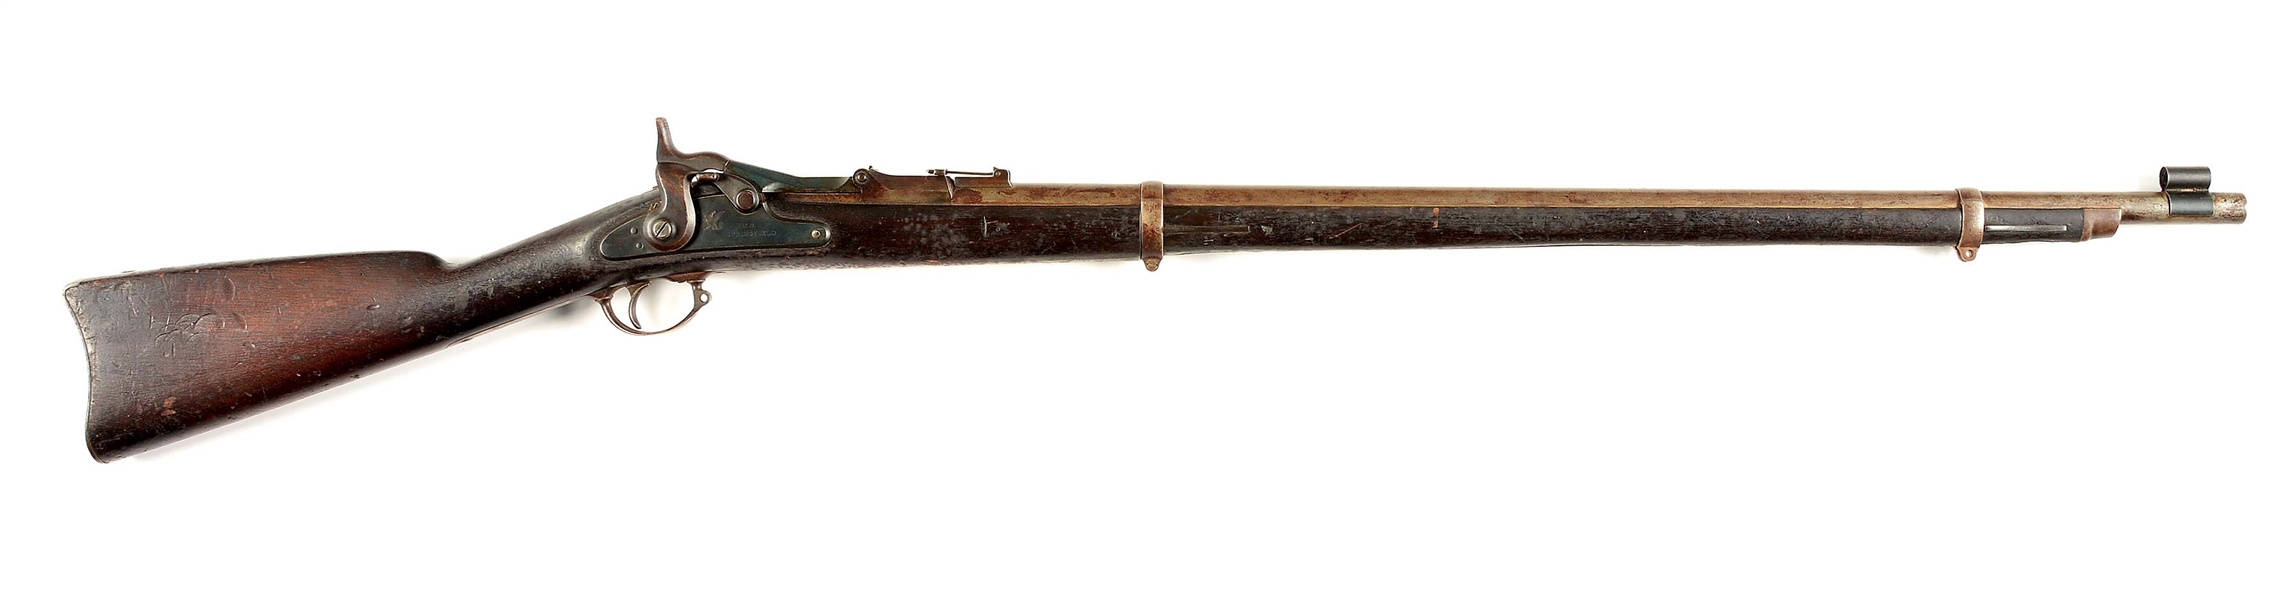 (A) SPRINGFIELD TRAPDOOR 1868 PERCUSSION RIFLE.